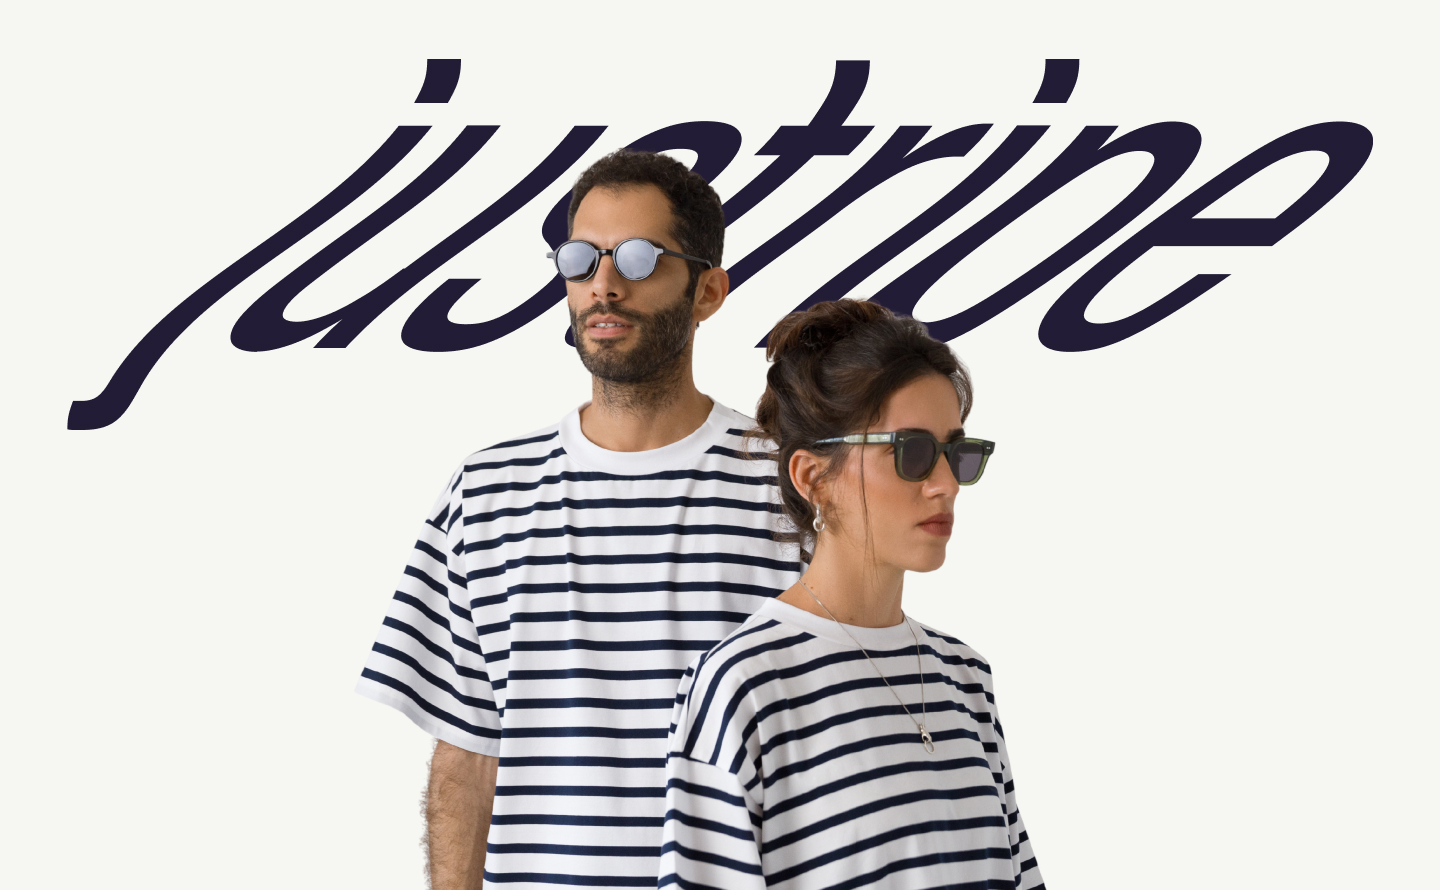 Justripe – the just-right striped t-shirt